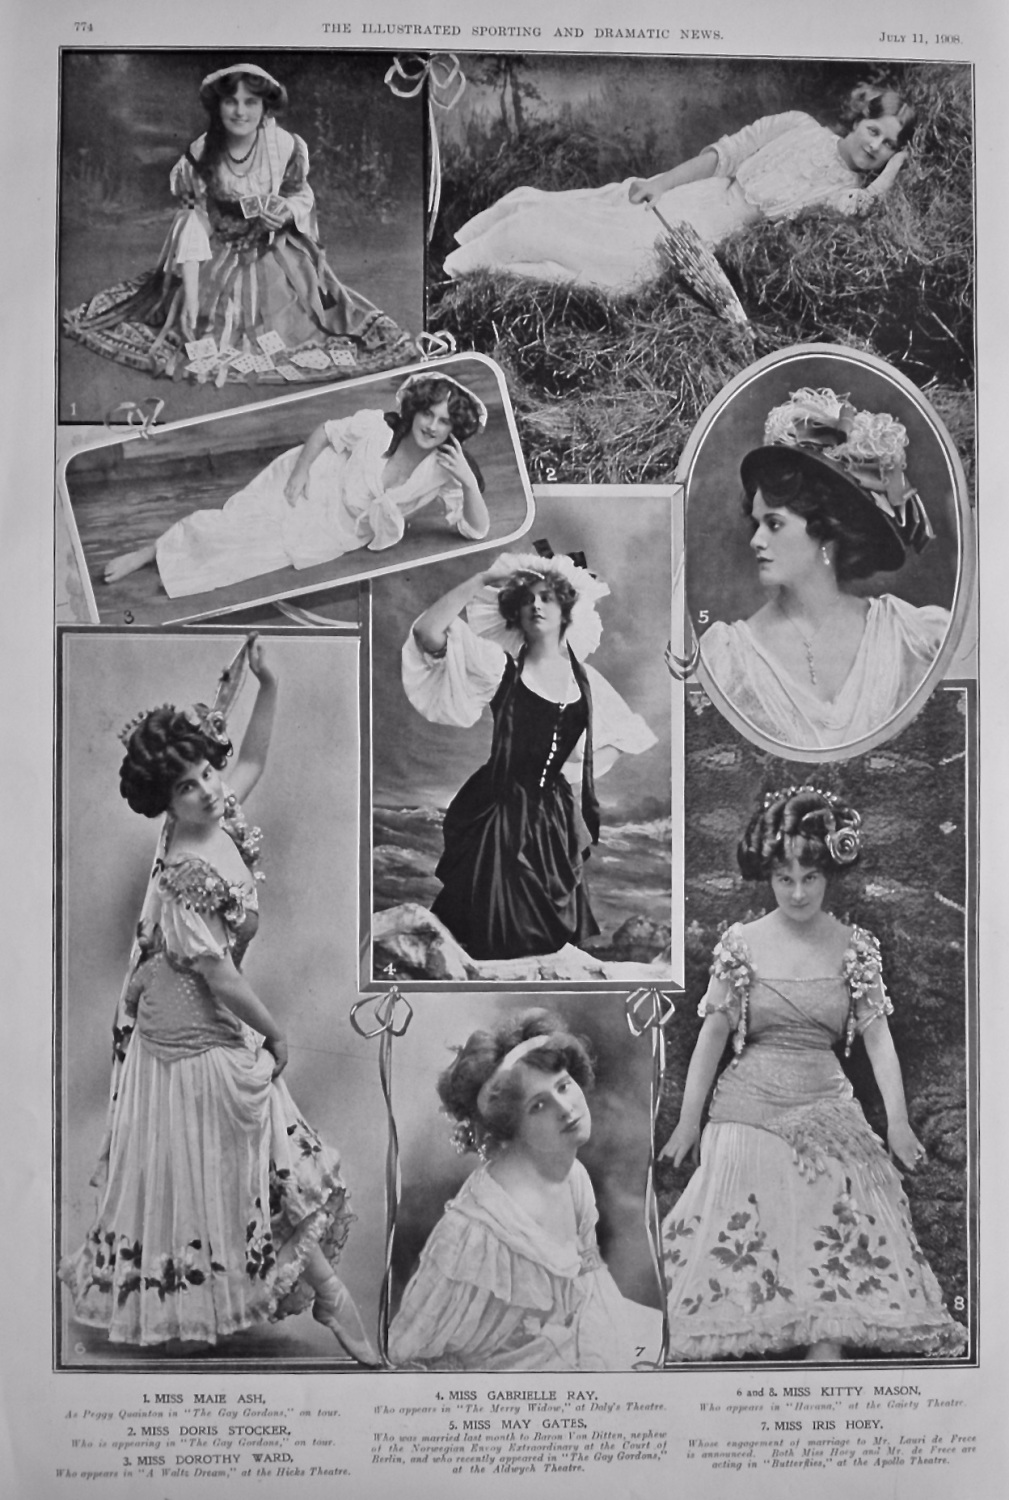 Actresses from the Stage at this time. 1908.